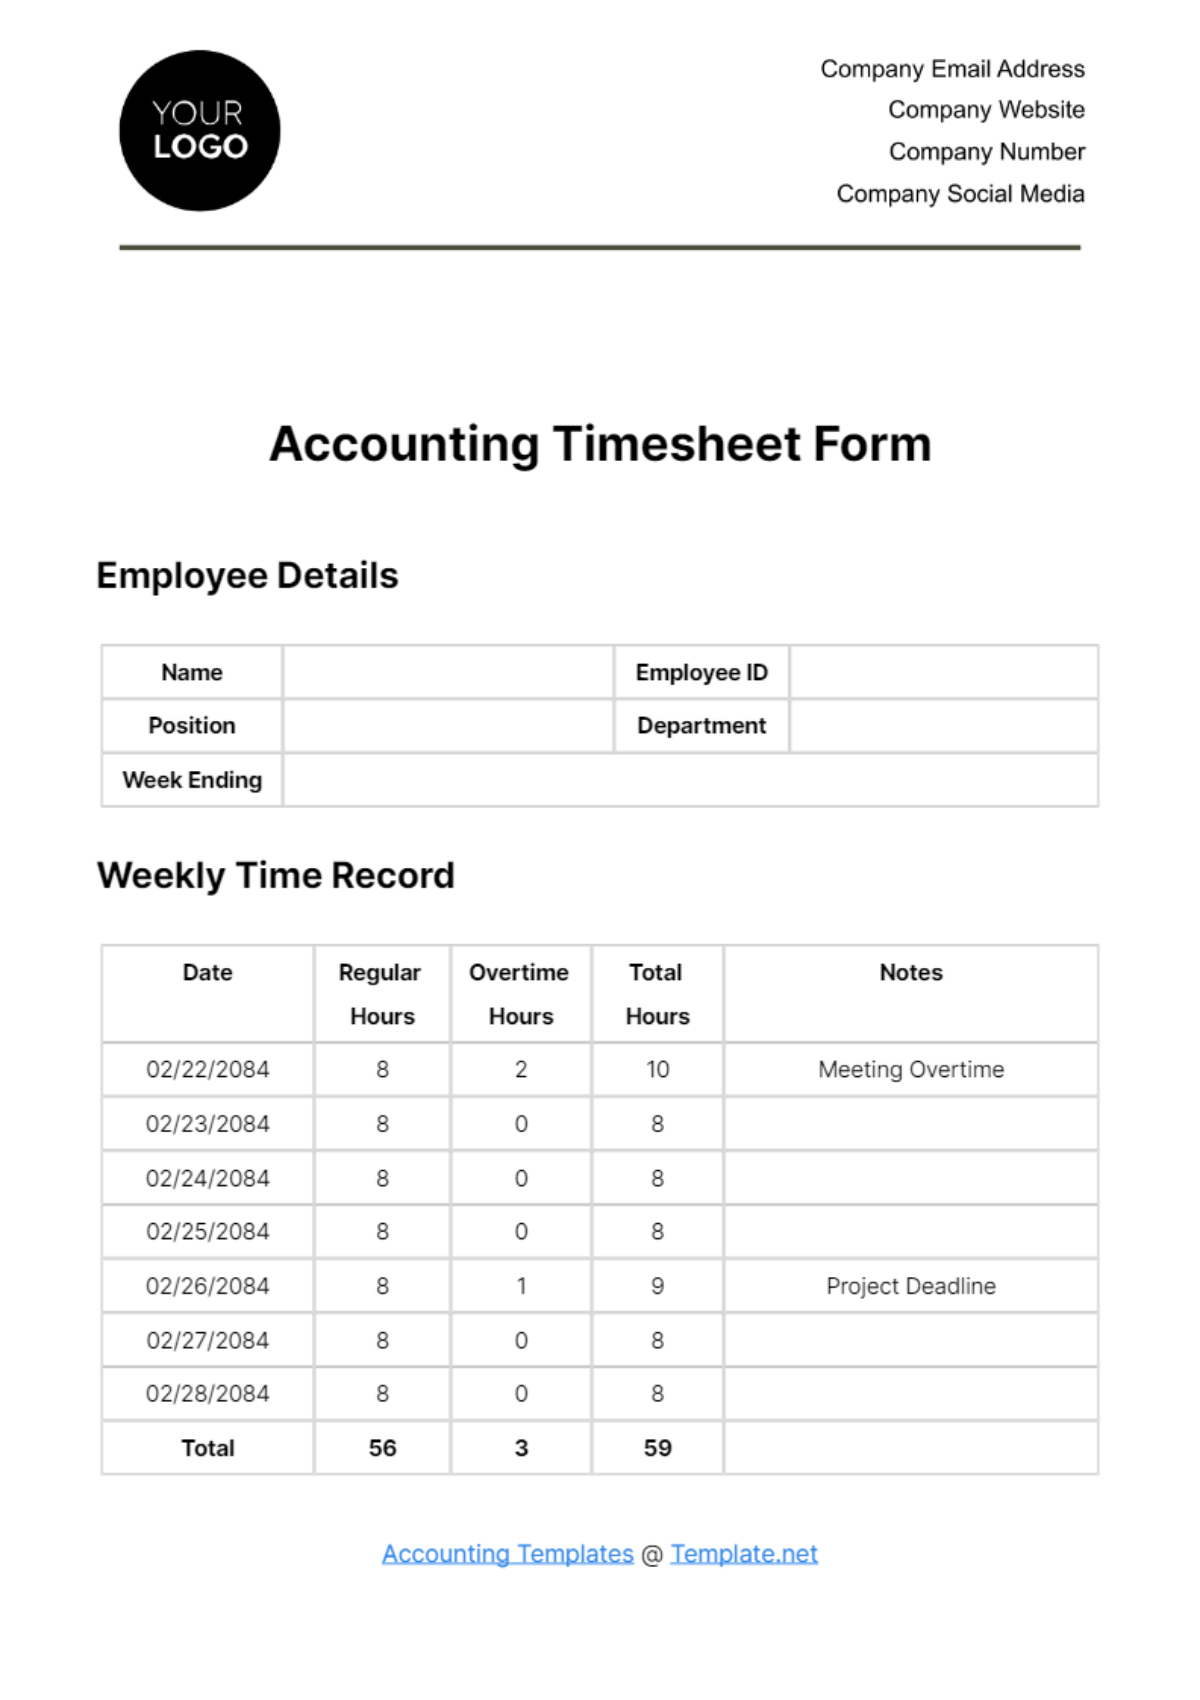 Free Accounting Timesheet Form Template